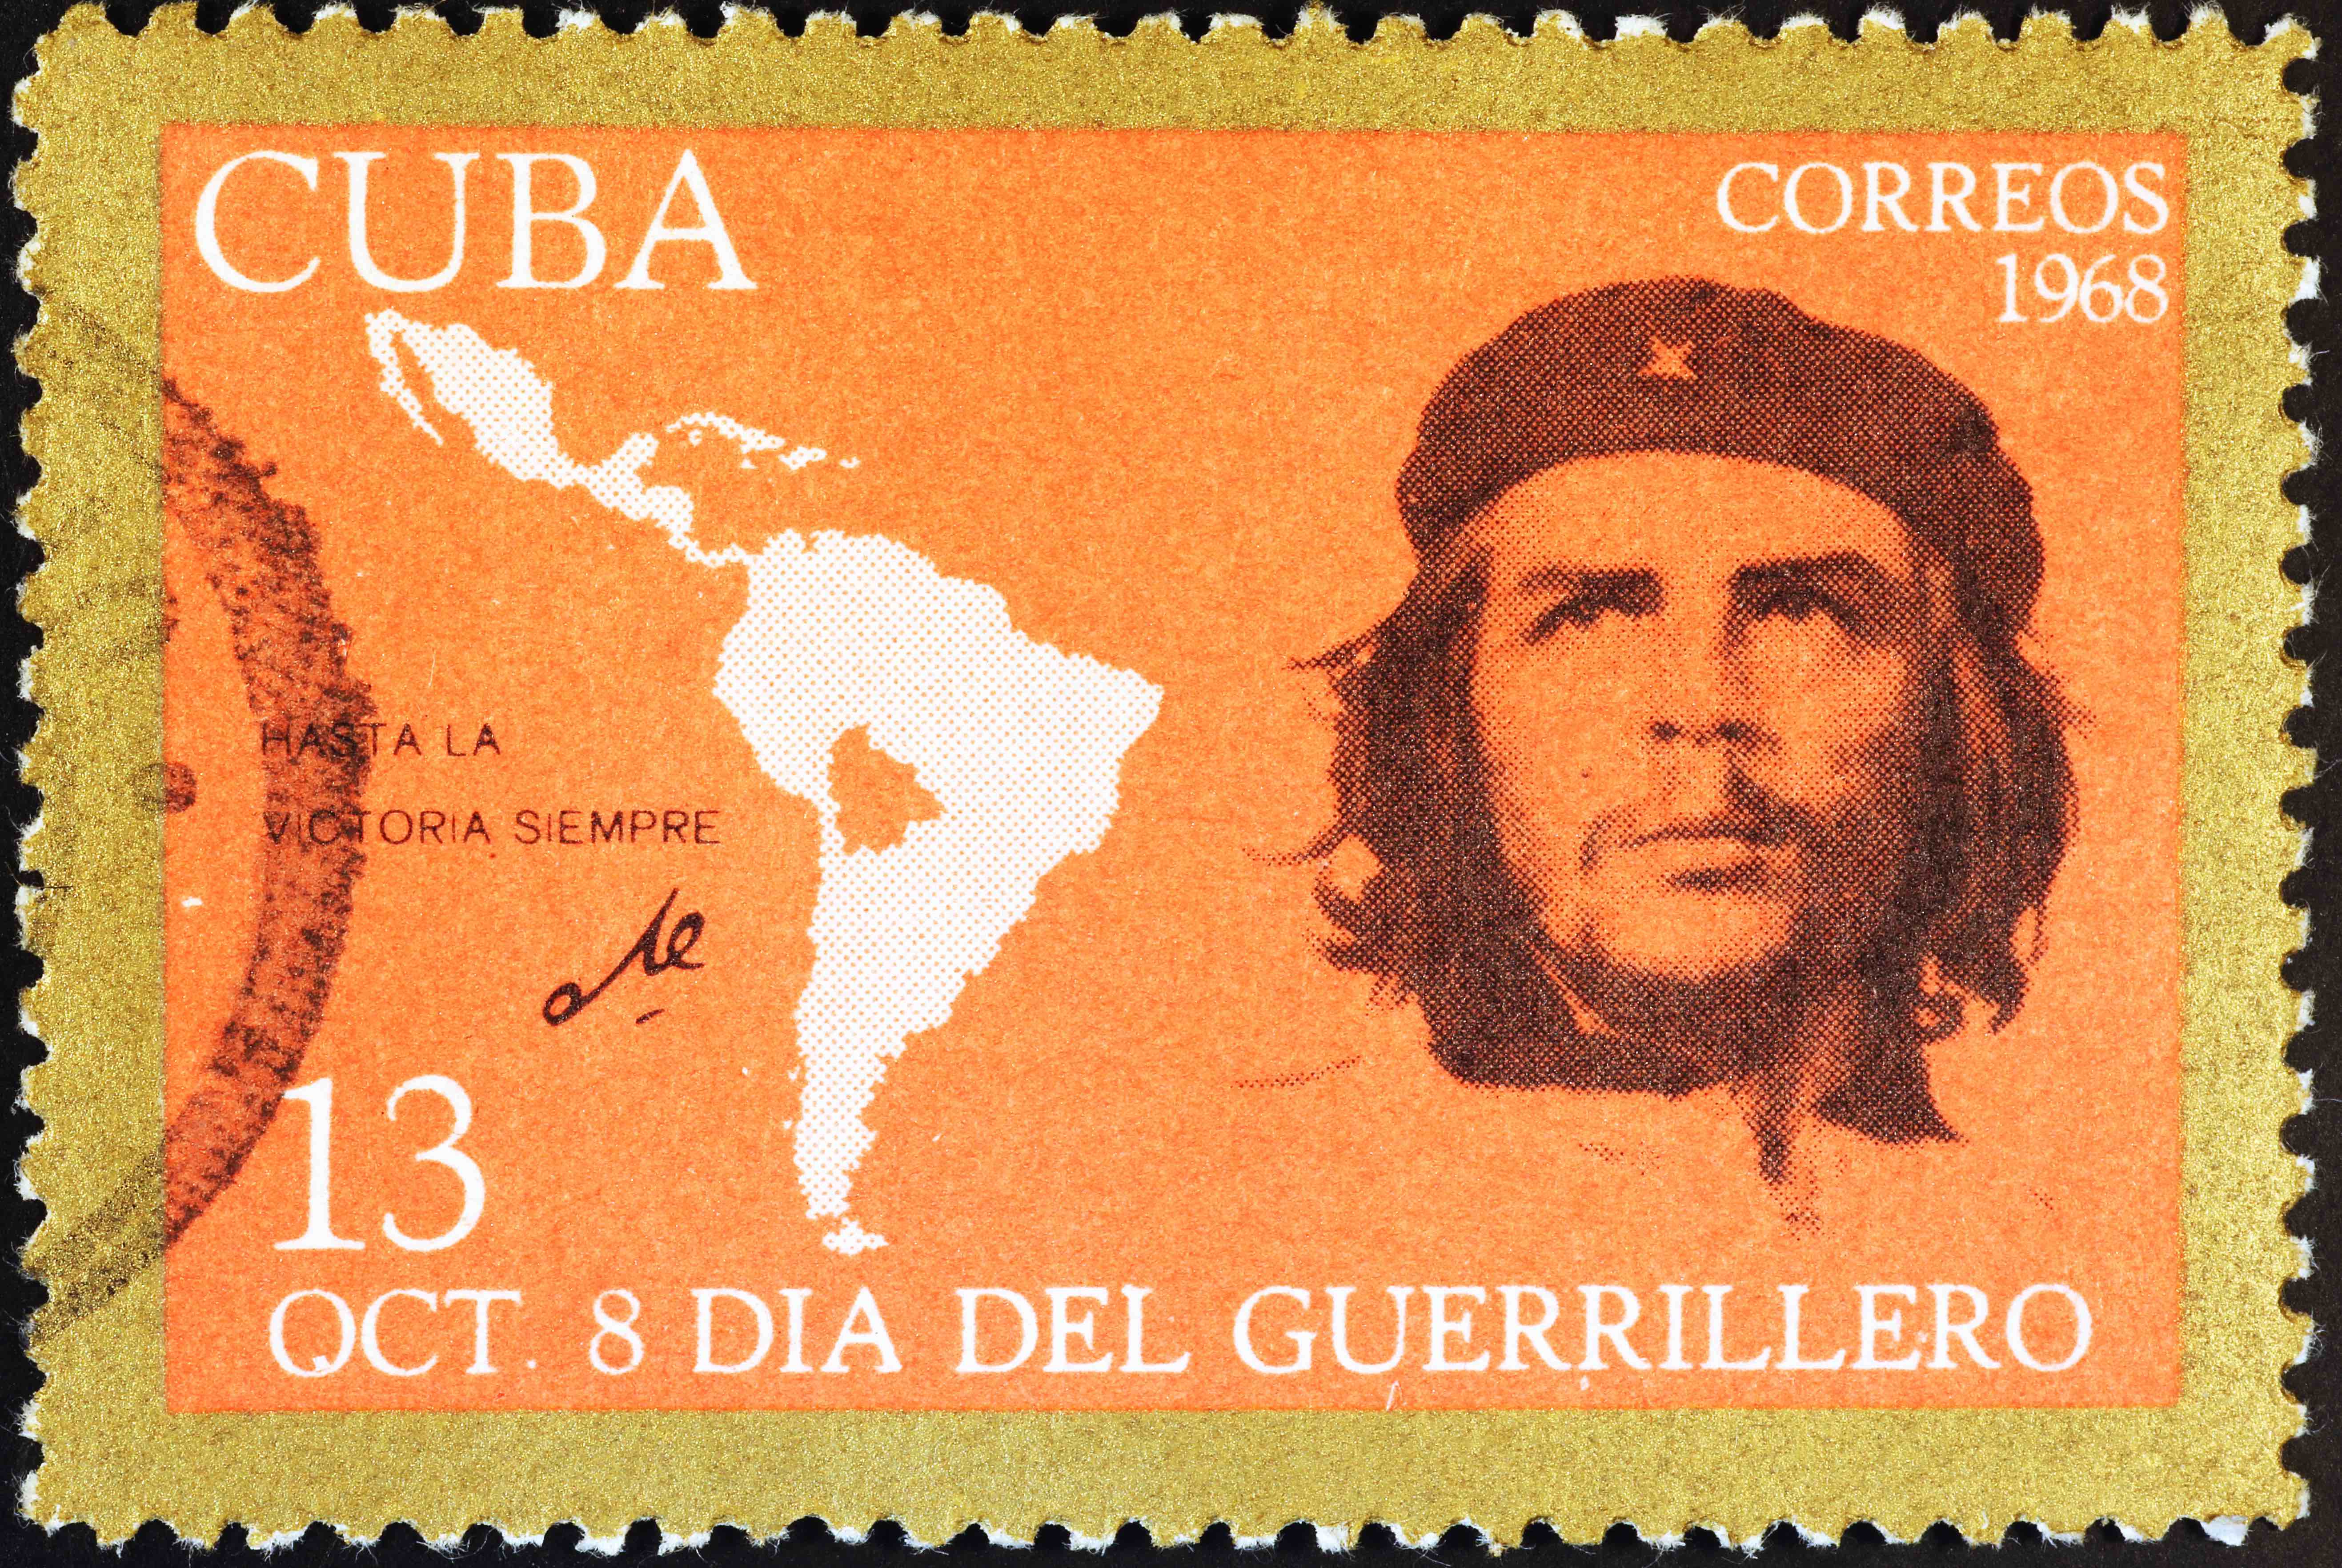 General Che Guevara on cuban postage stamp